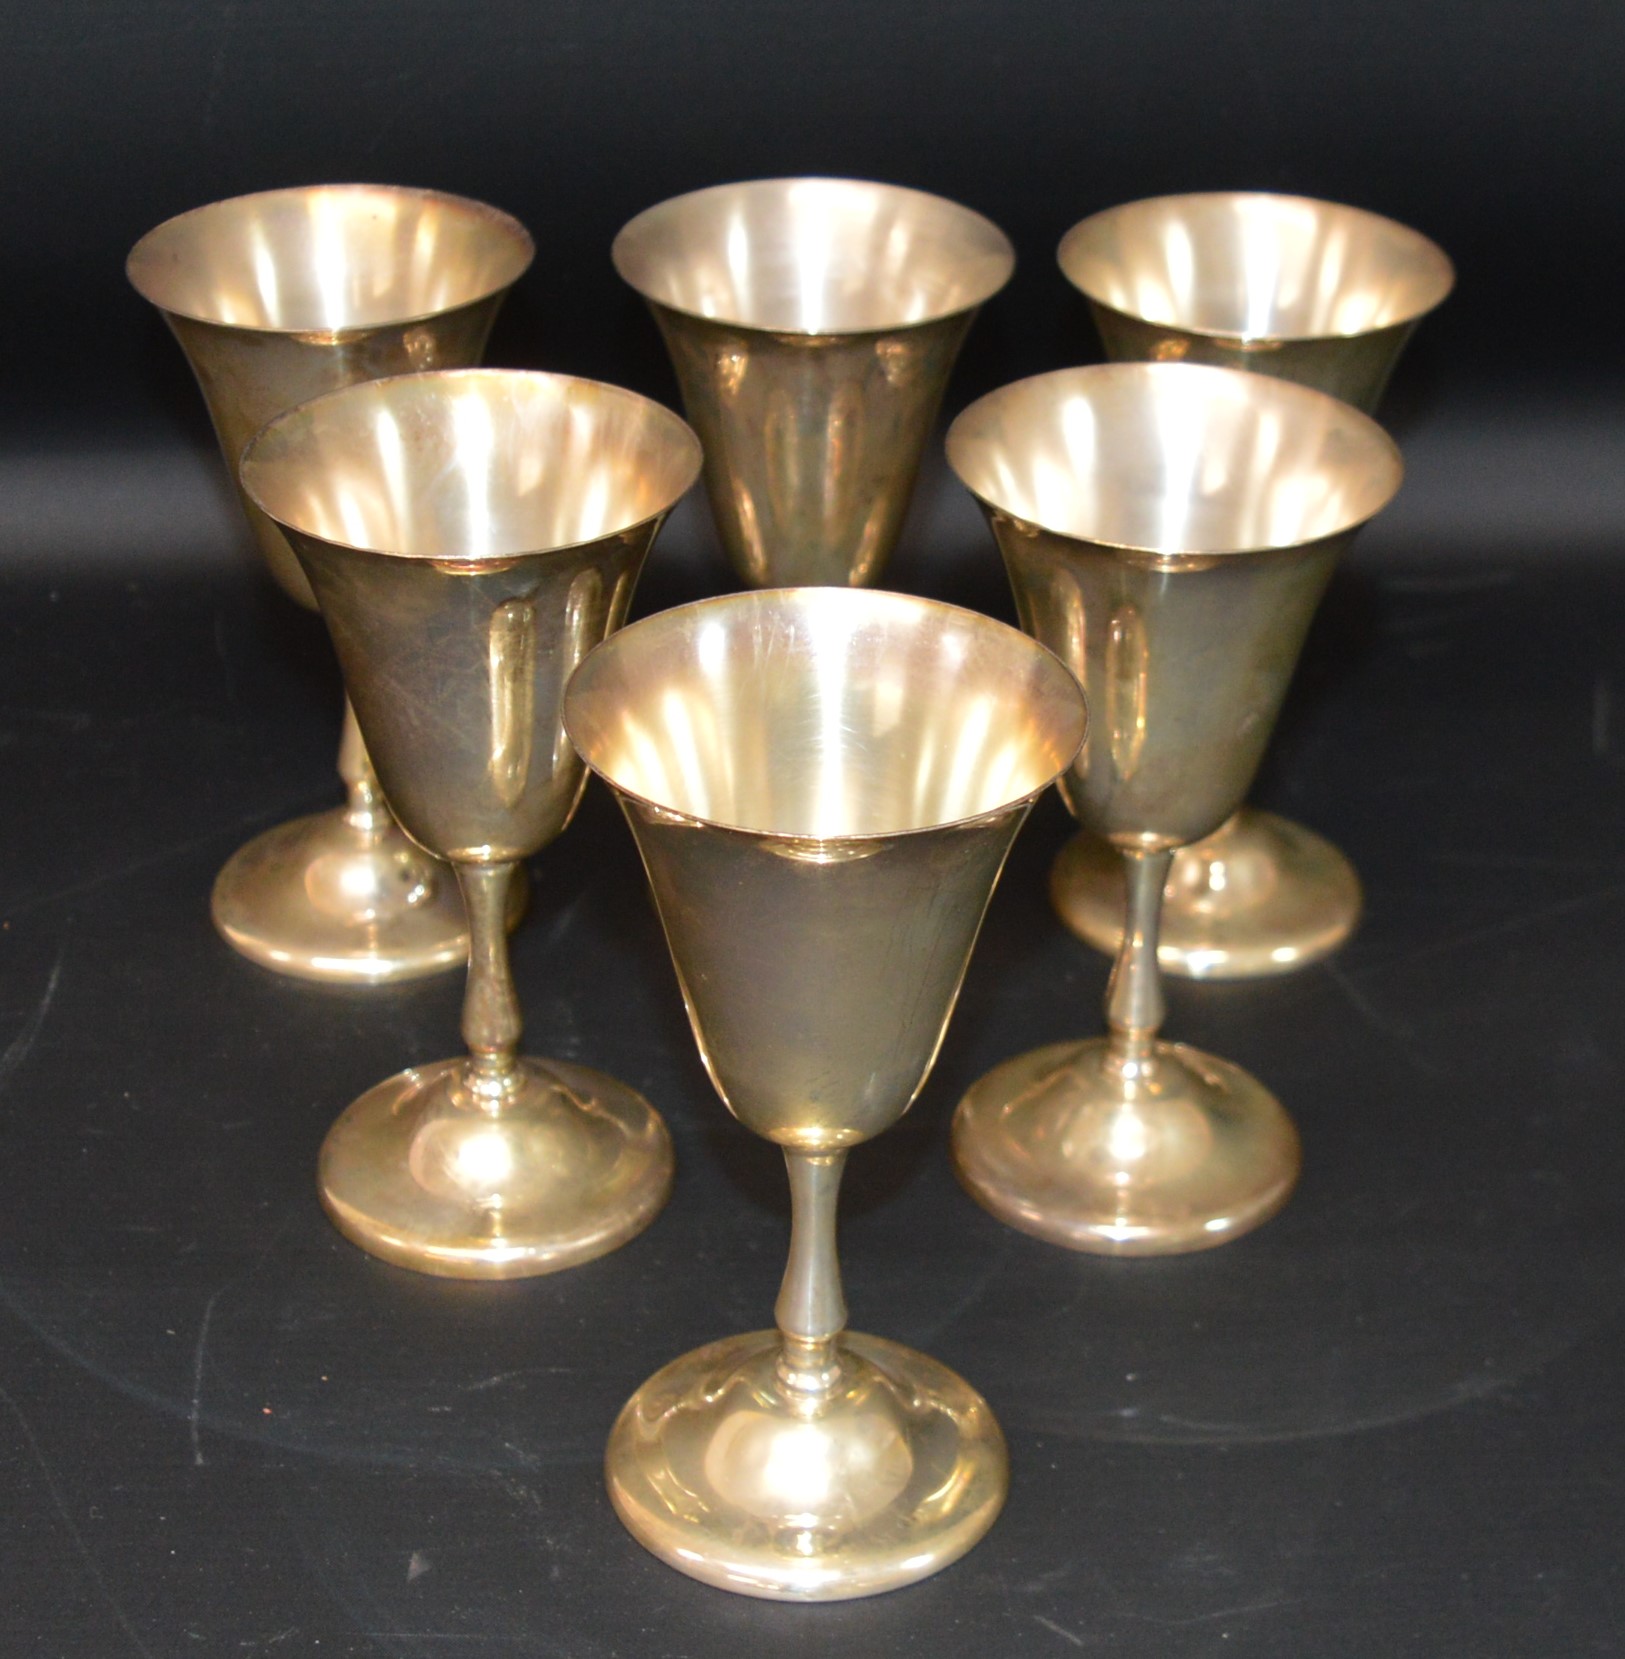 Set of 6 Italian silver goblets marked 73 PA 800 wt 15.09ozt